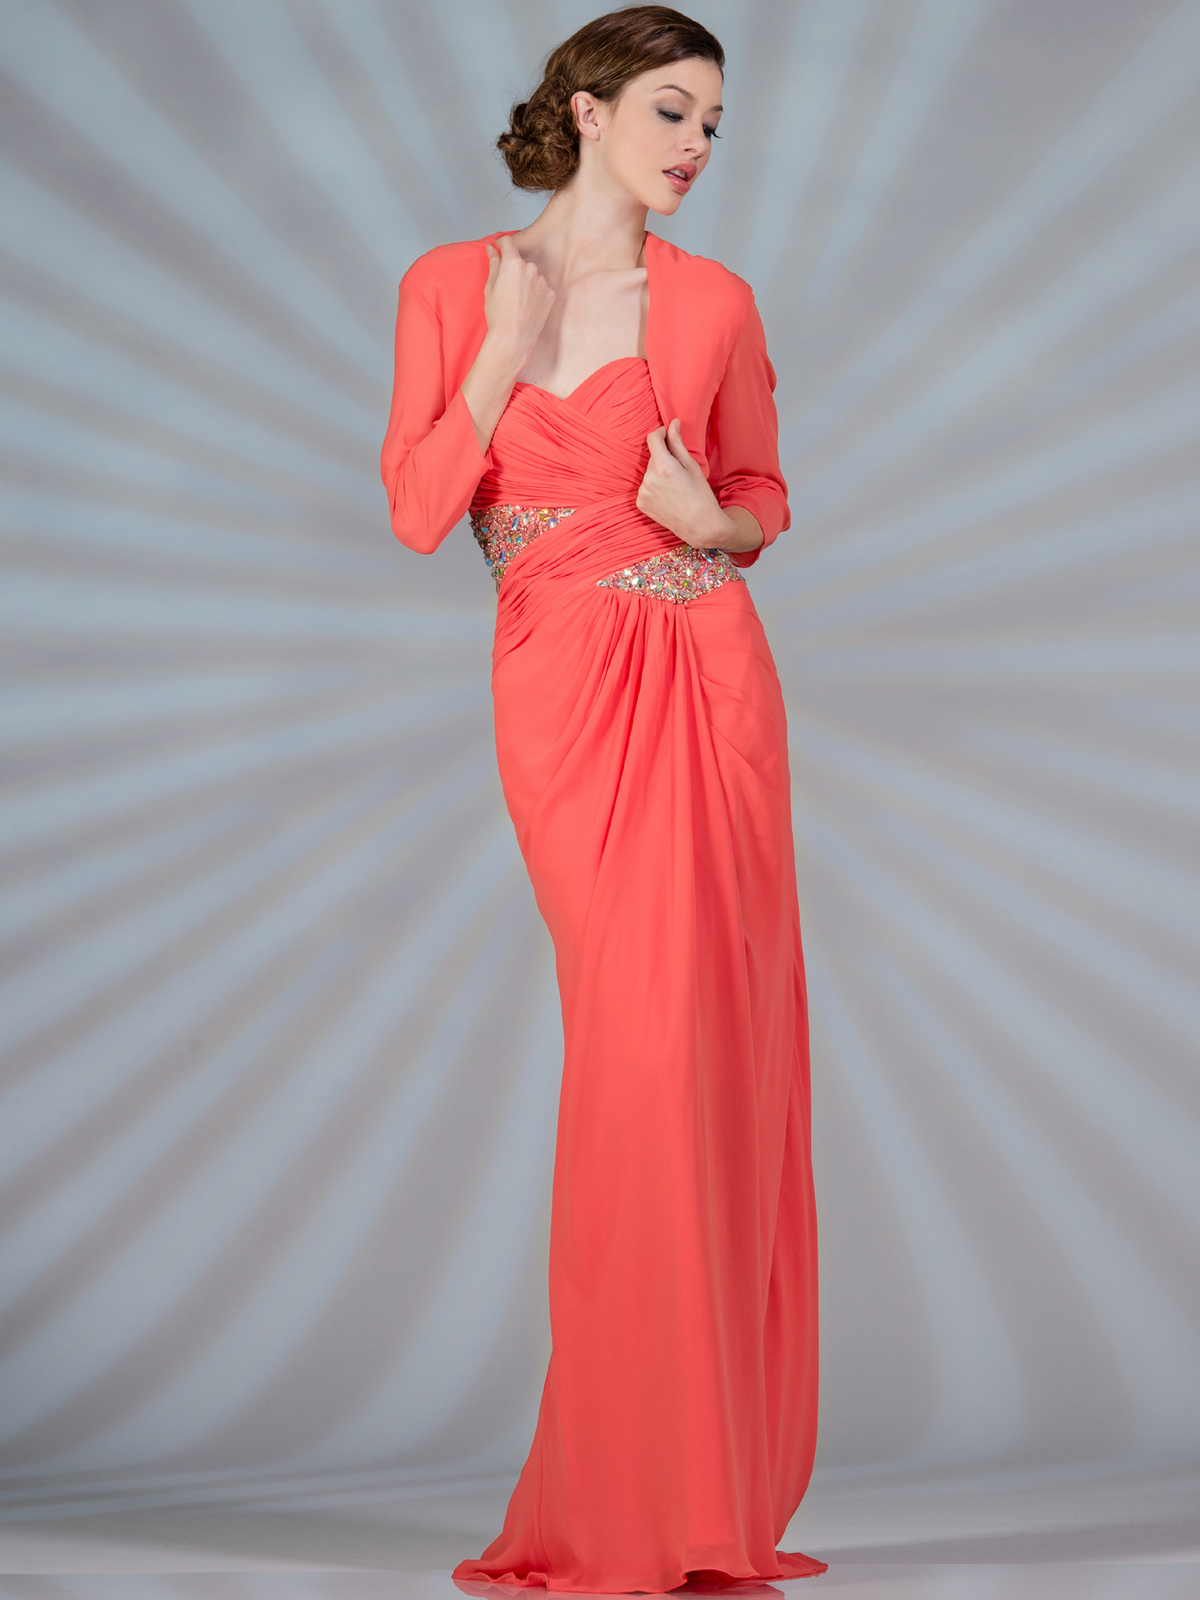 Ruched Jeweled Chiffon Evening Dress with Bolero - Sung Boutique L.A.